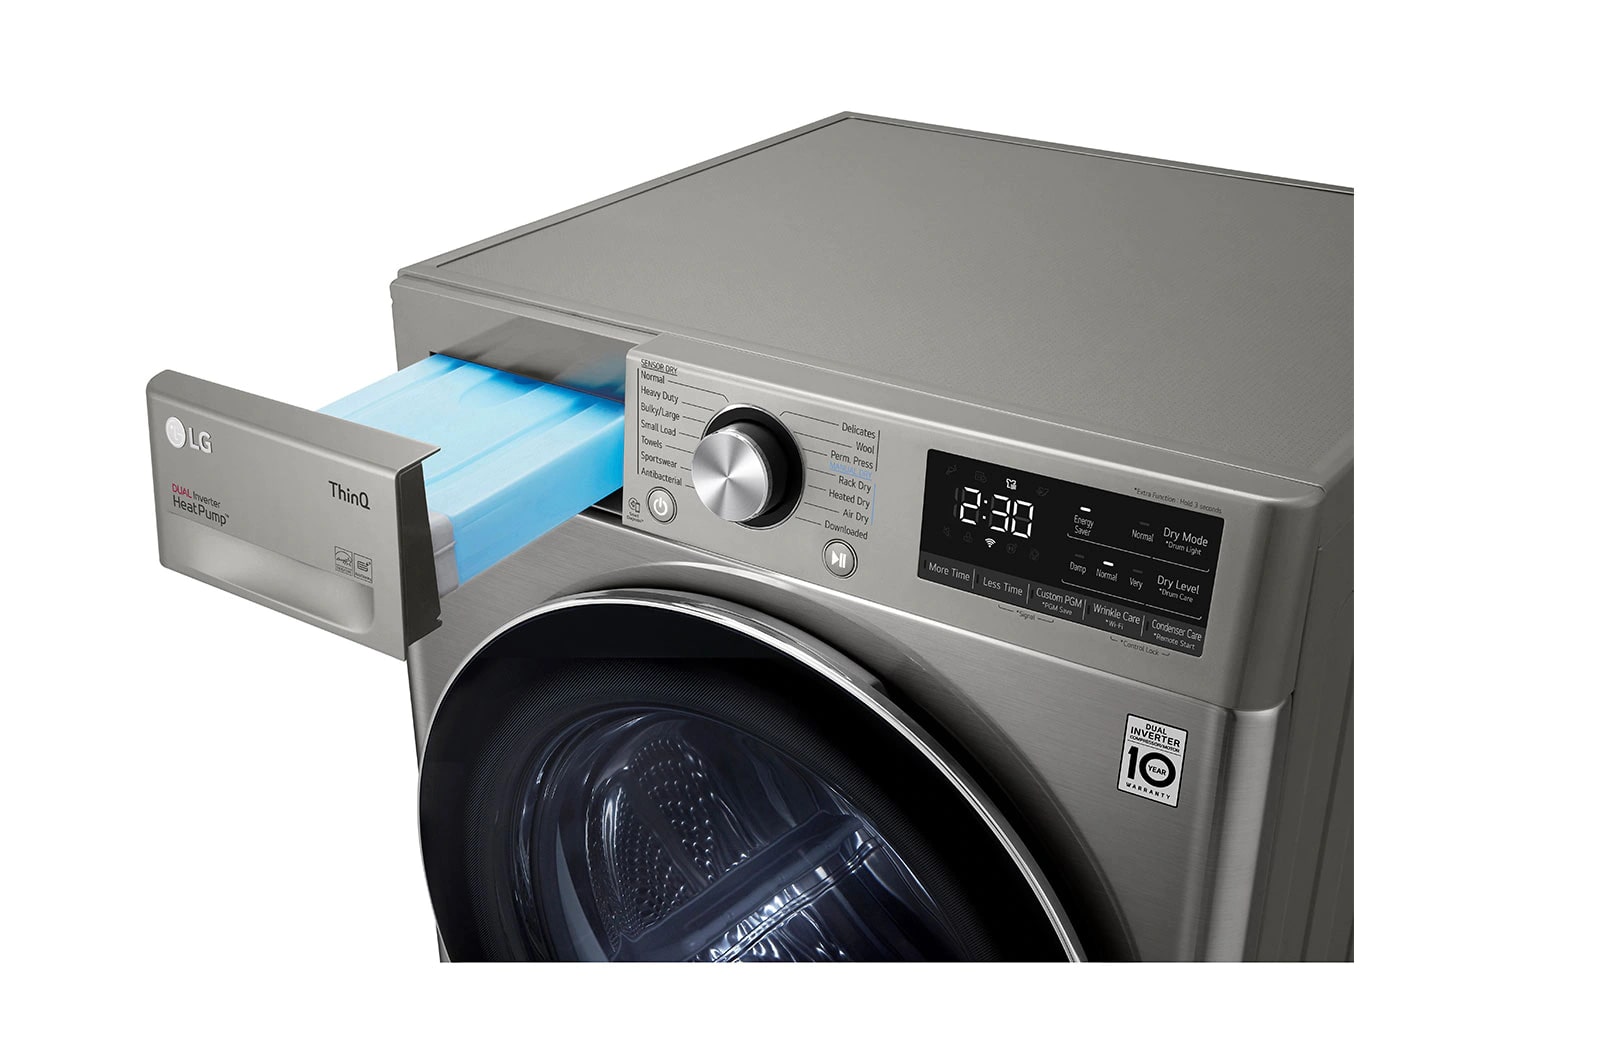 LG - 4.2 cu. Ft  Electric Dryer in Grey - DLHC1455P